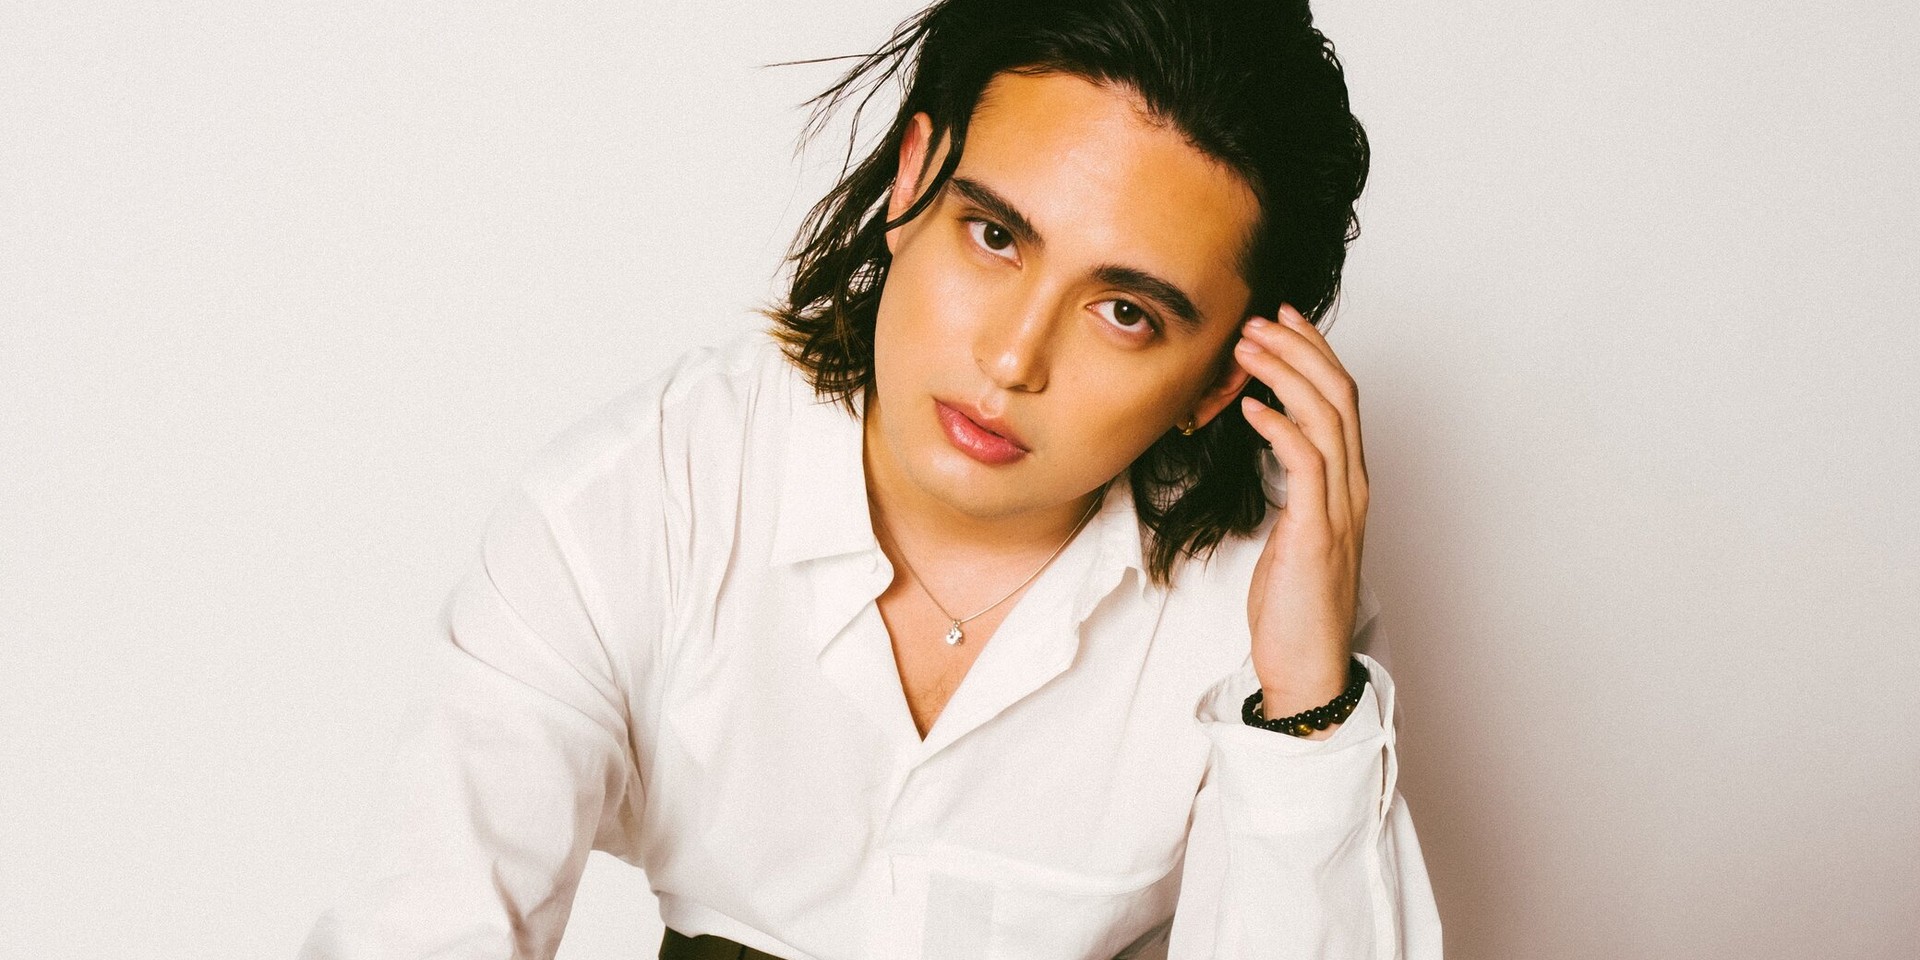 James Reid turns adversity into positivity and explores a new sound in his newest single 'Soda' - listen